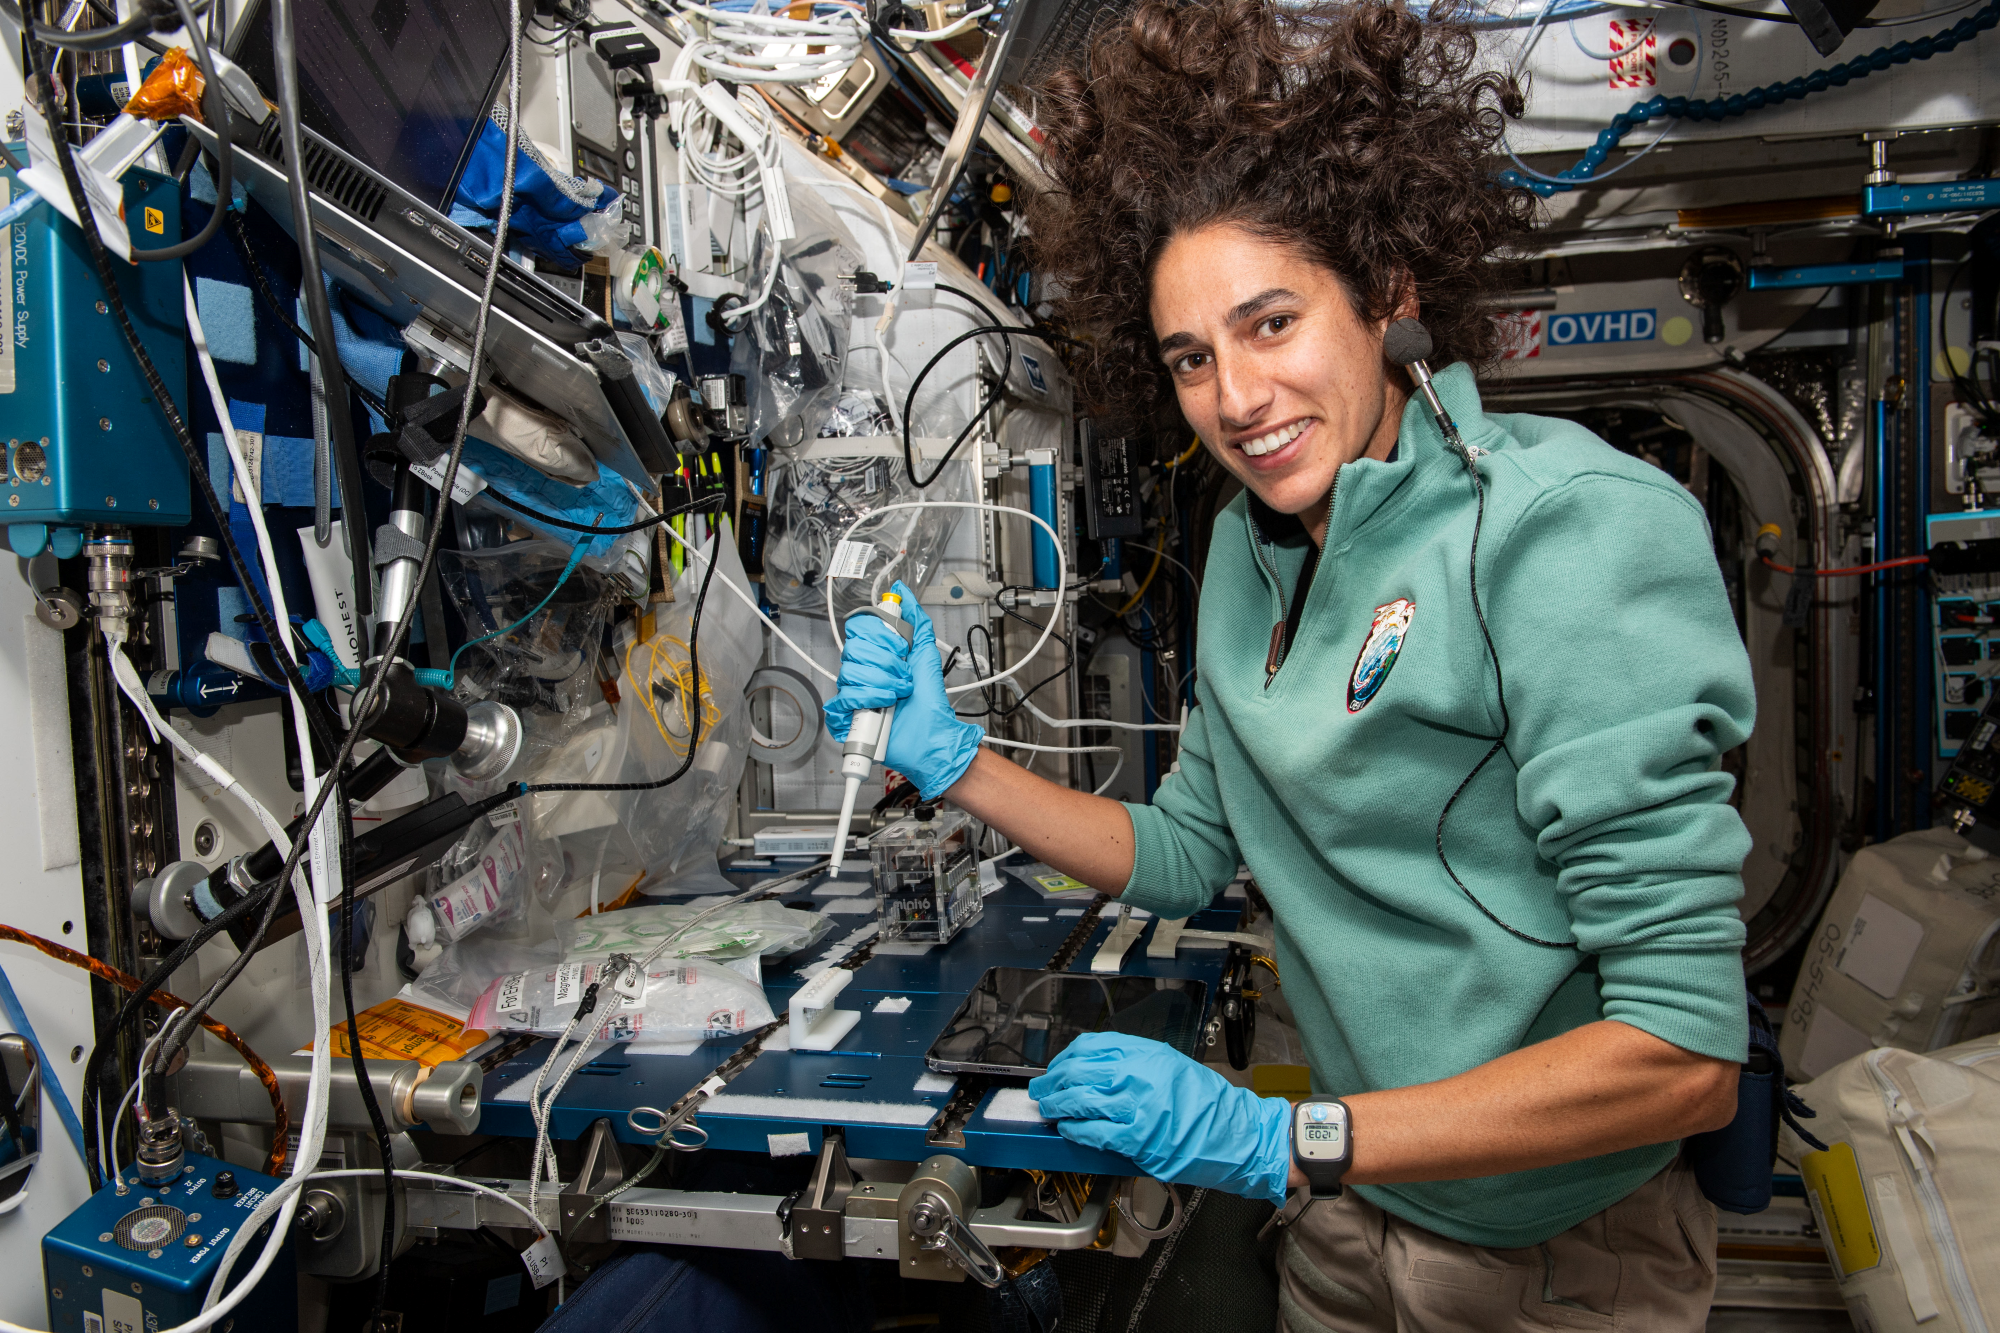 NASA astronaut Jasmin Moghbeli services microbe samples for DNA sequencing aboard the International Space Station.